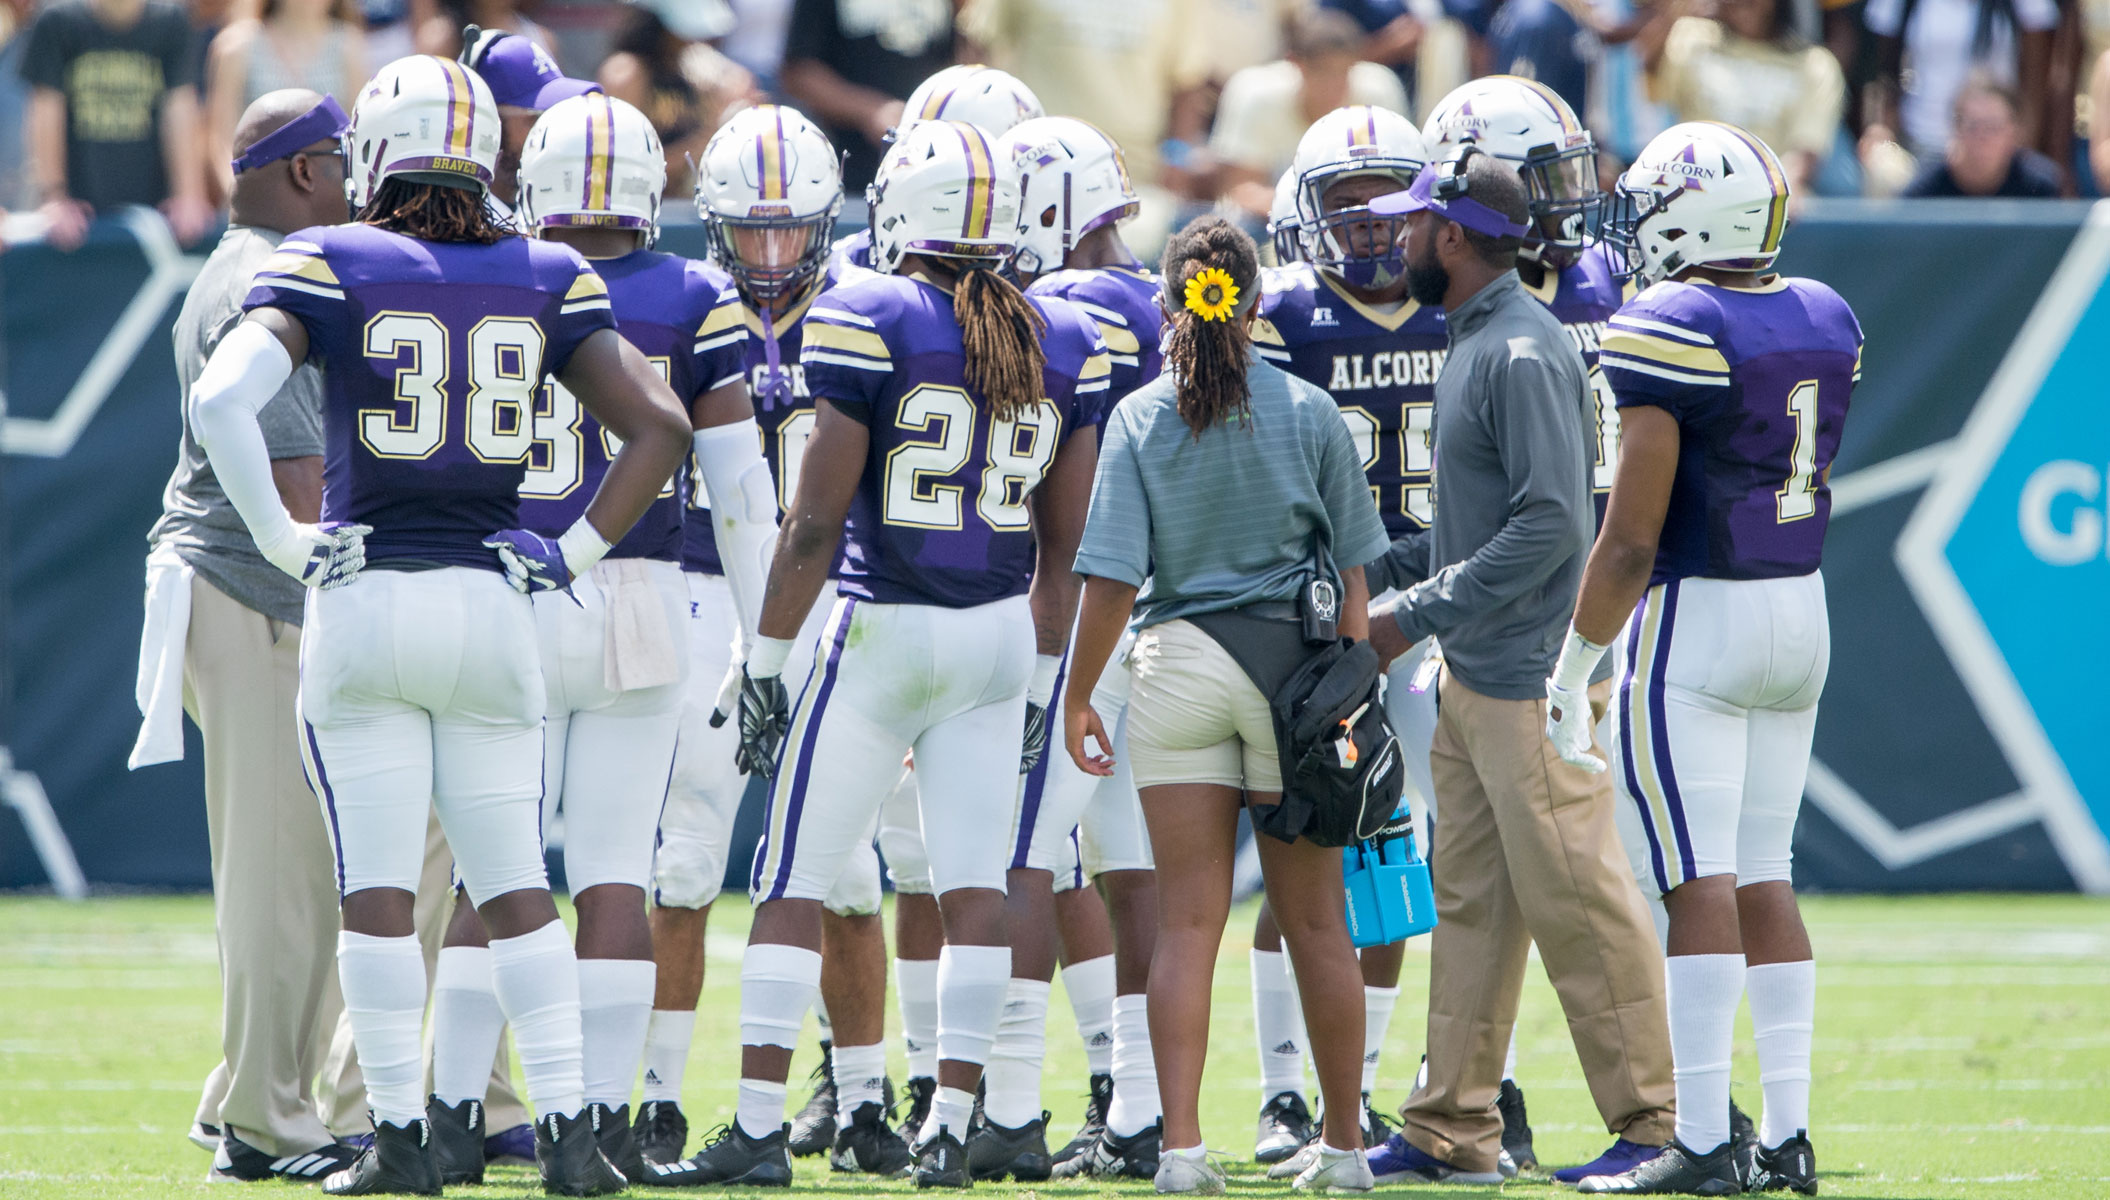 MikeCheck: McNair insists there’s no QB controversy at Alcorn State – it’s Harper’s job as long as Braves keep rolling